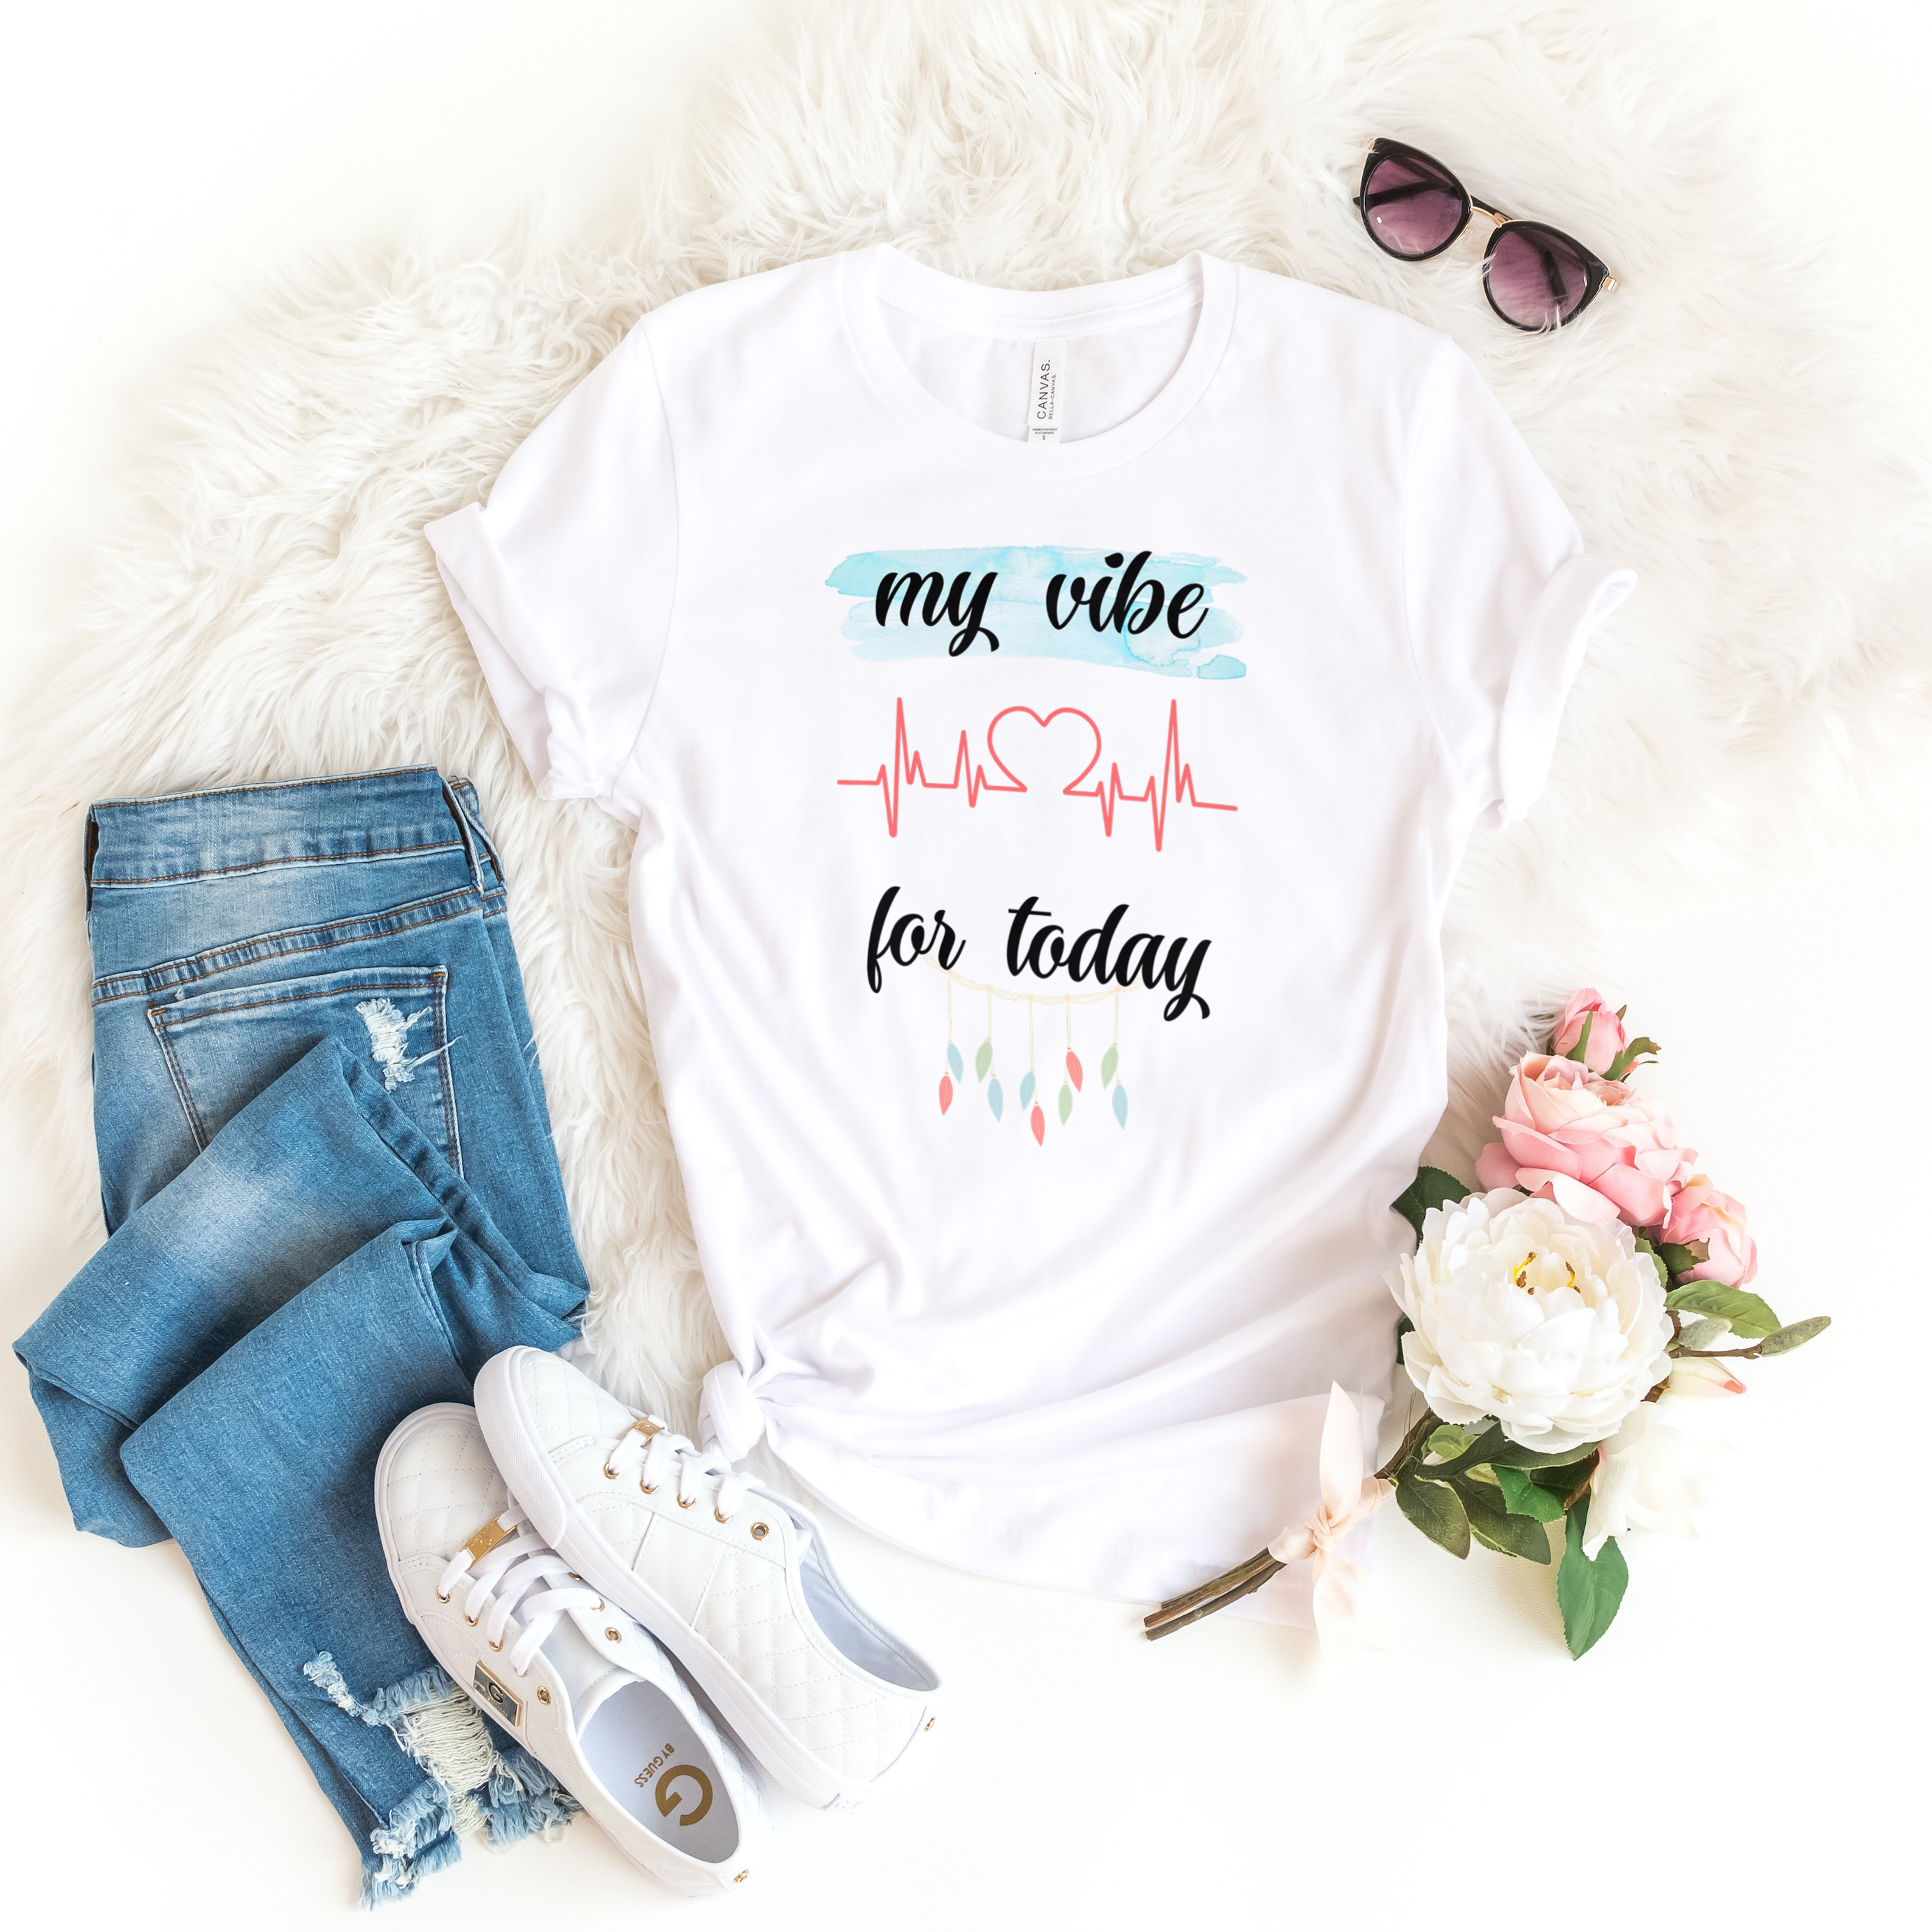 Story of Awakening Lifestyle Community Spirituality Relationships Love Light Meditation Oneness Earth Balance Healing Shop Store Charity Tree Nature Read Write T shirt Tops Tees Clothing Women Horoscope Organic Cotton Vibe For Today Is Love Quote